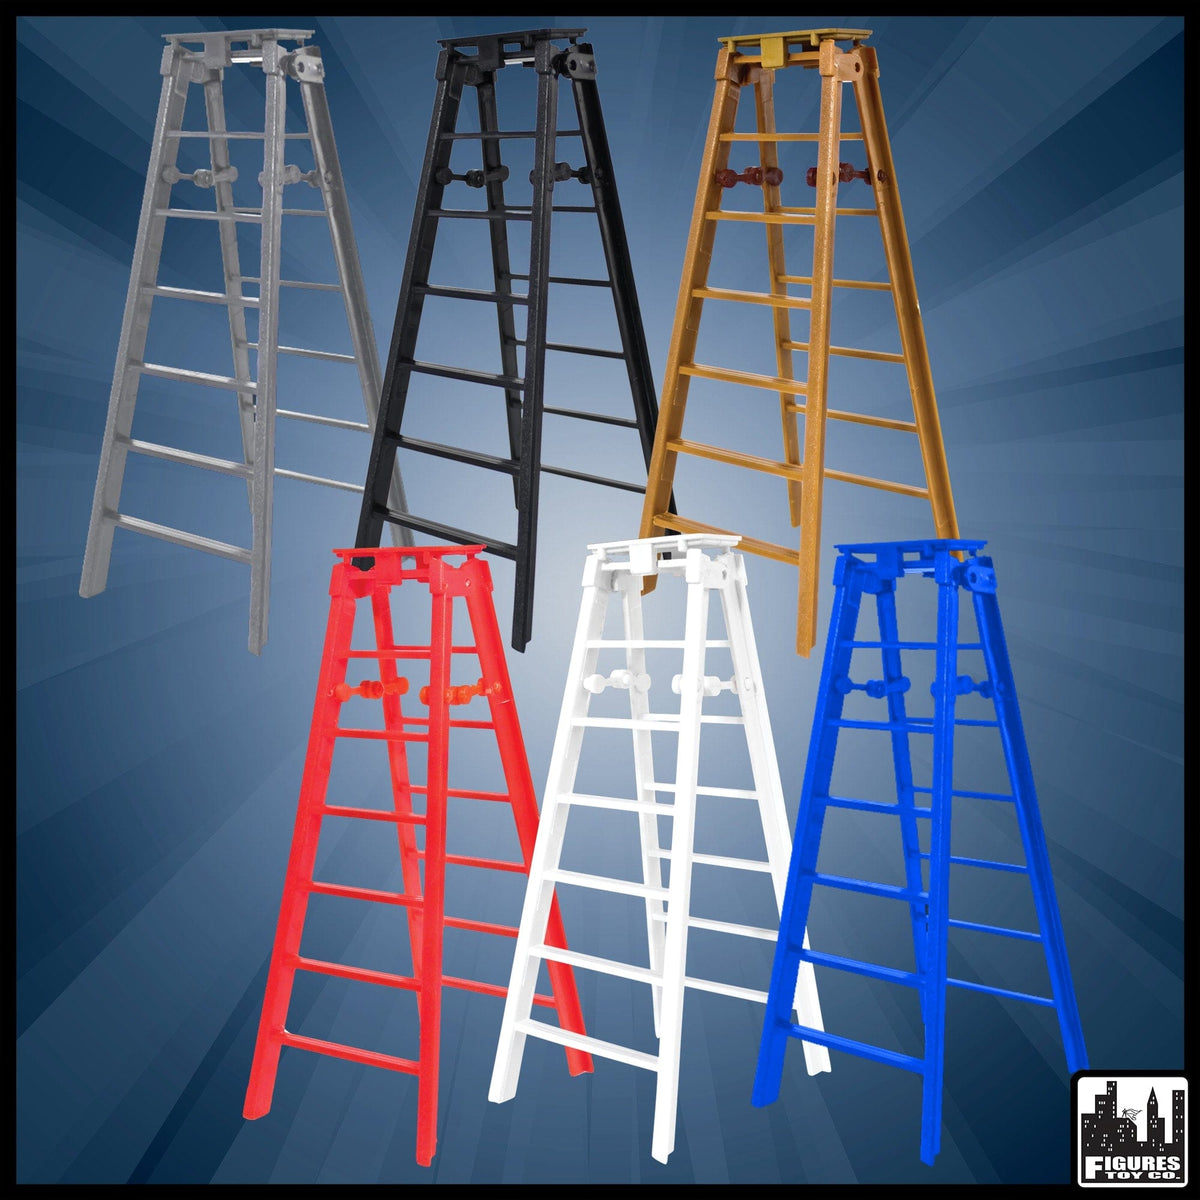 Set of 6 Different Colored Ladders for WWE Wrestling Action Figures: Red, White, Blue, Black, Gray, Brown